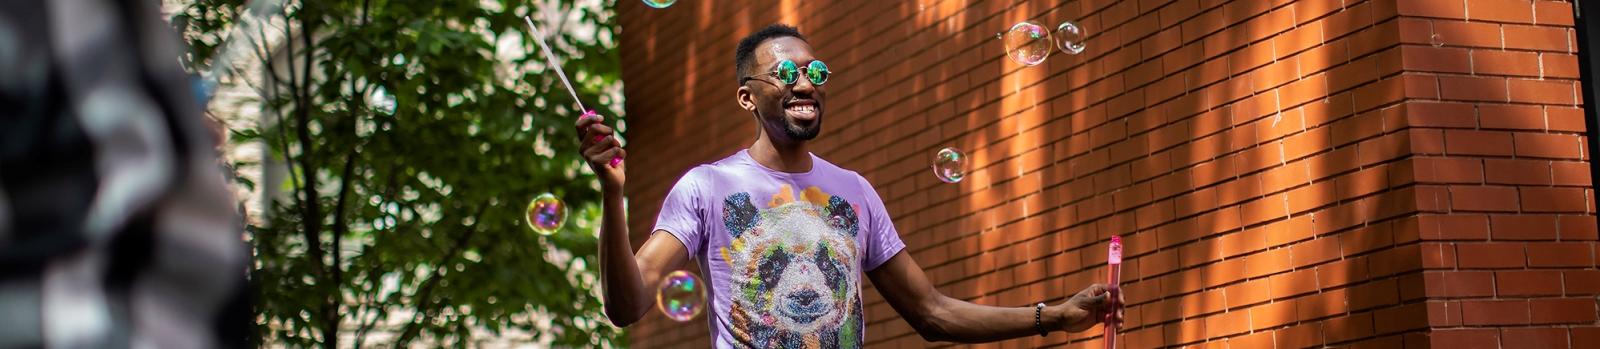 Person playing with bubbles and smiling outside of the LGBT center